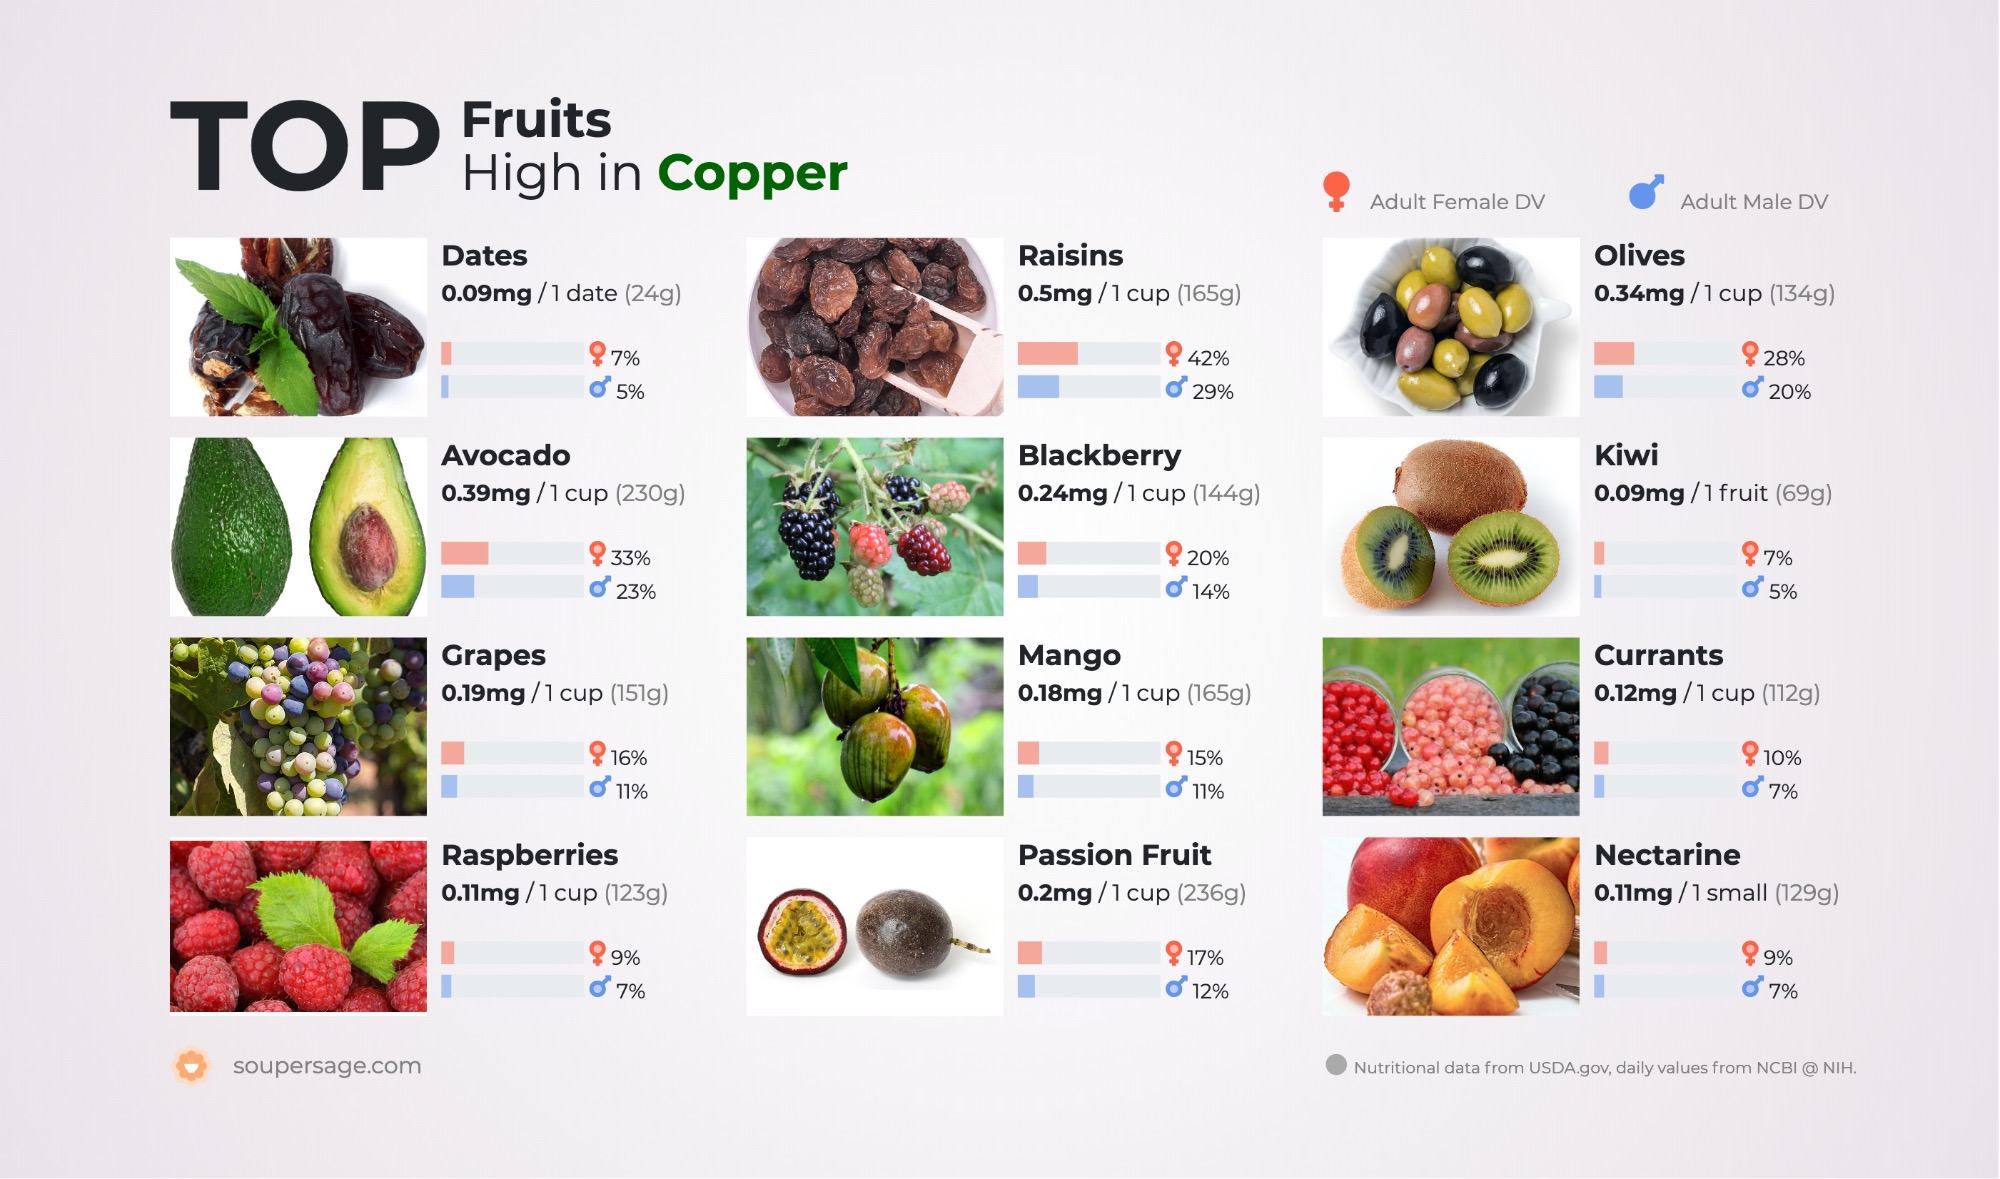 image of Top Fruits High in Copper